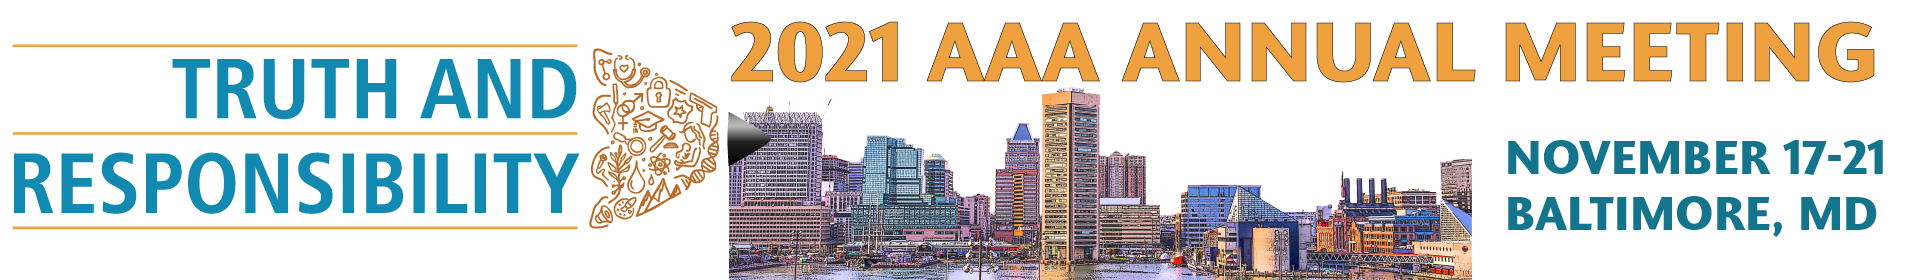 2021 AAA Annual Meeting, November 17-21 | Baltimore, MD  Logo Banner - Truth and Responsibility on a stylized pencil with the Baltimore harbor skyline in the background